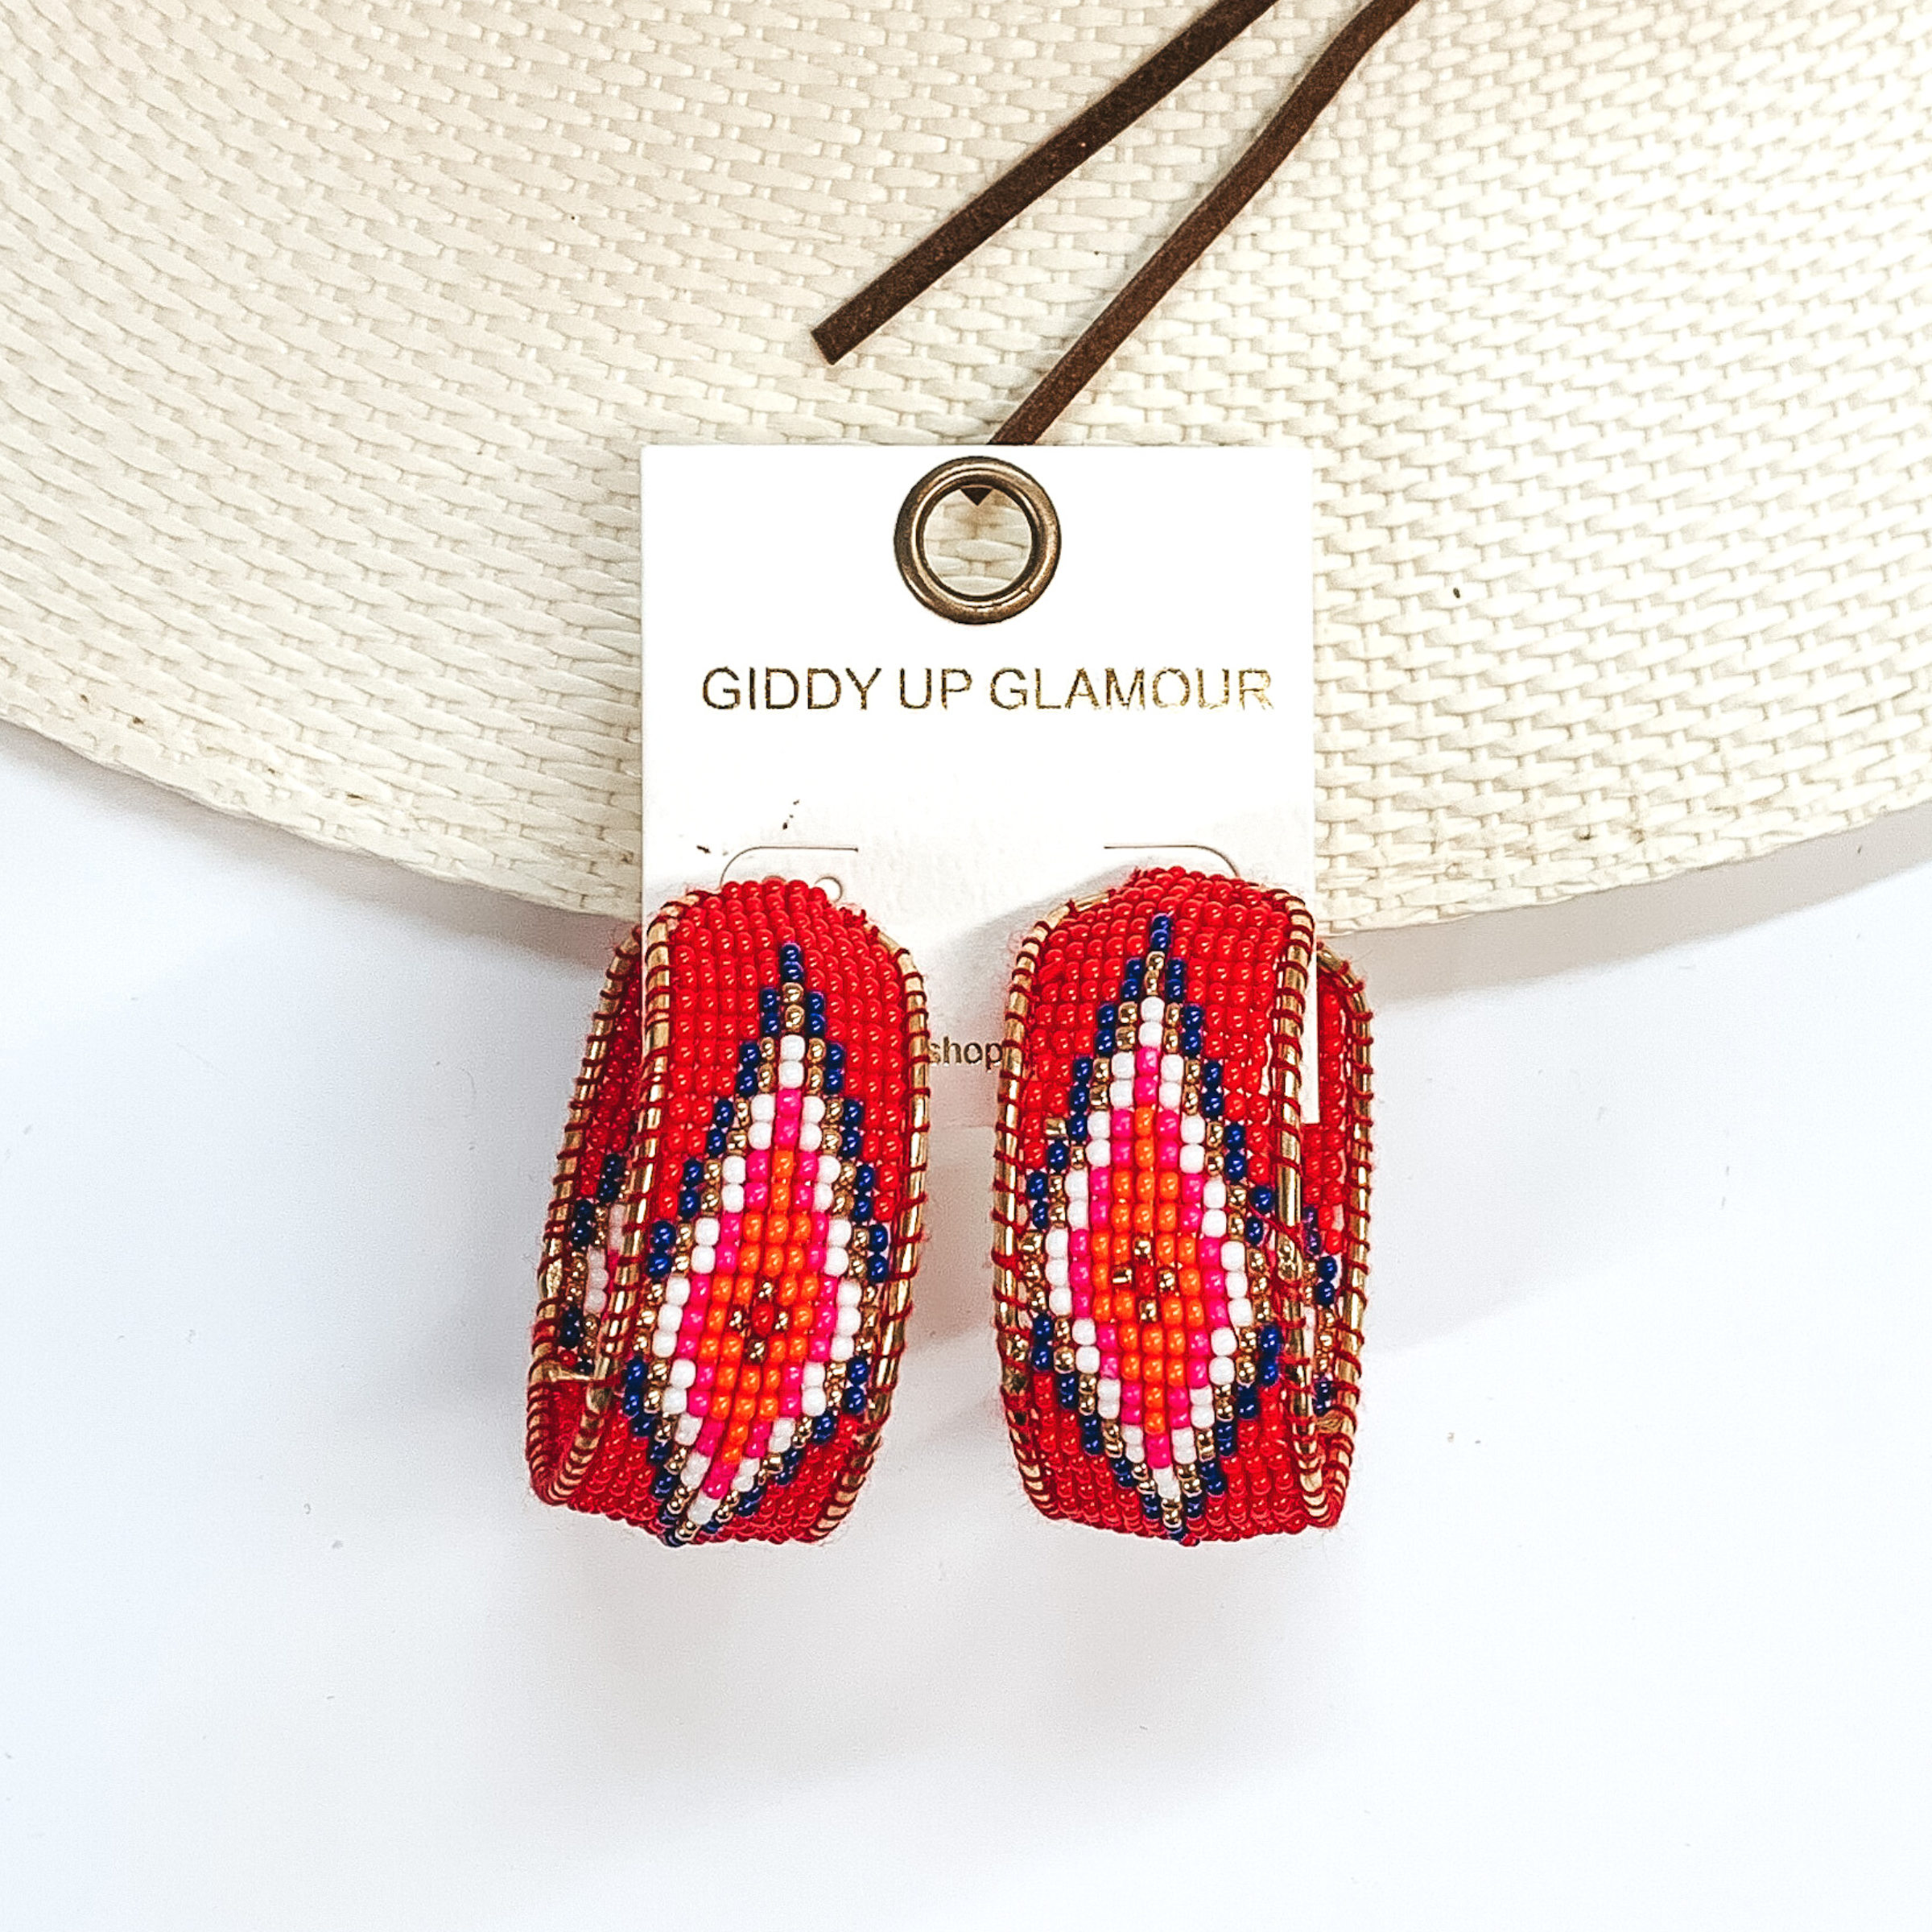 Beaded hoop earrings in red with an aztec design in multicolor. These earrings are pictured on a white background on a straw hat. 